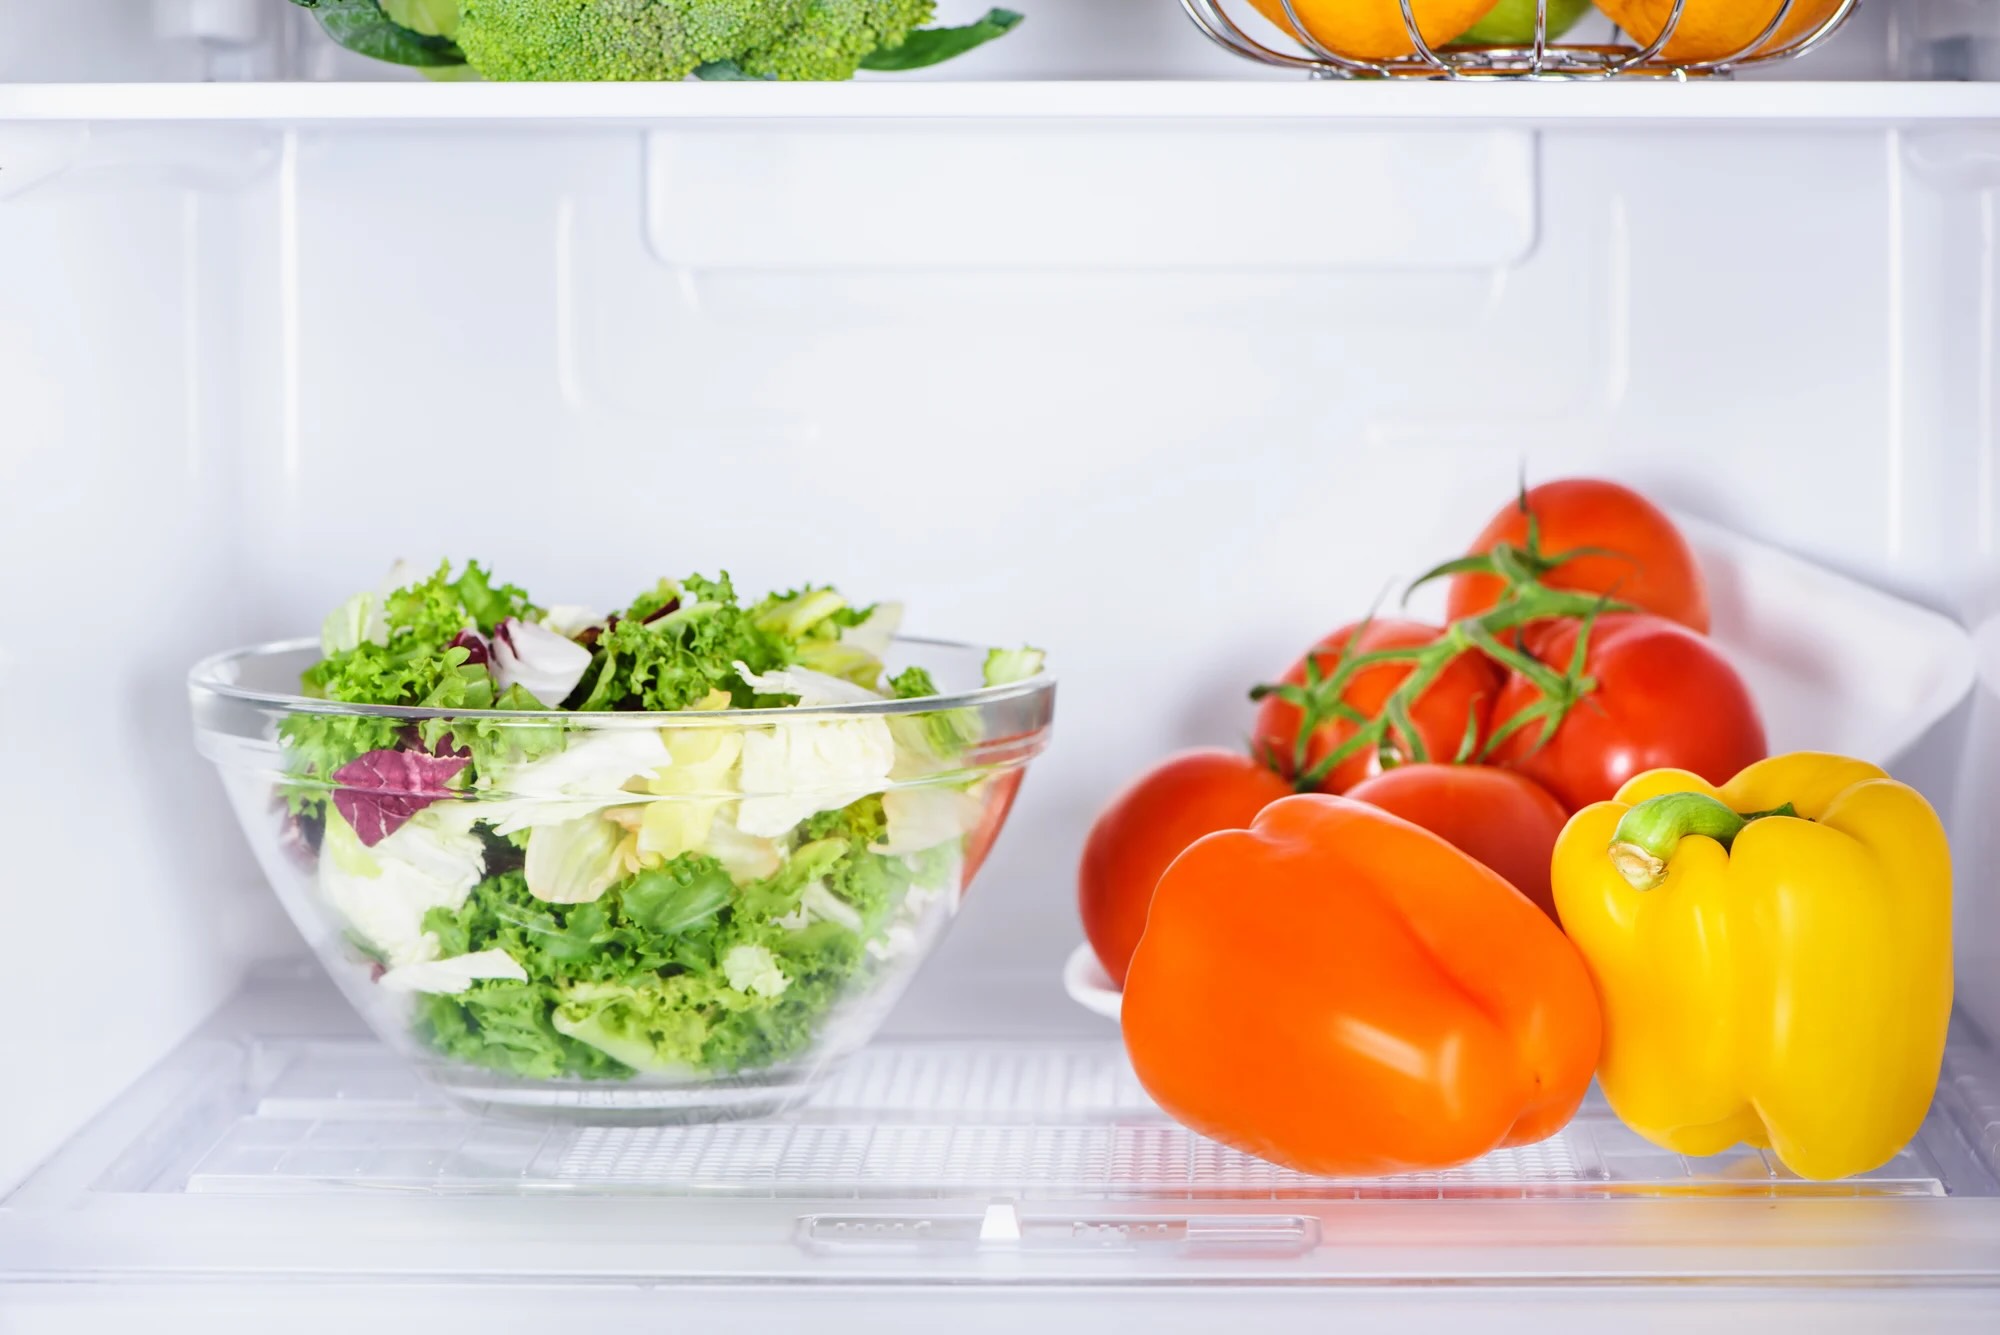 How To Store Salad In Fridge